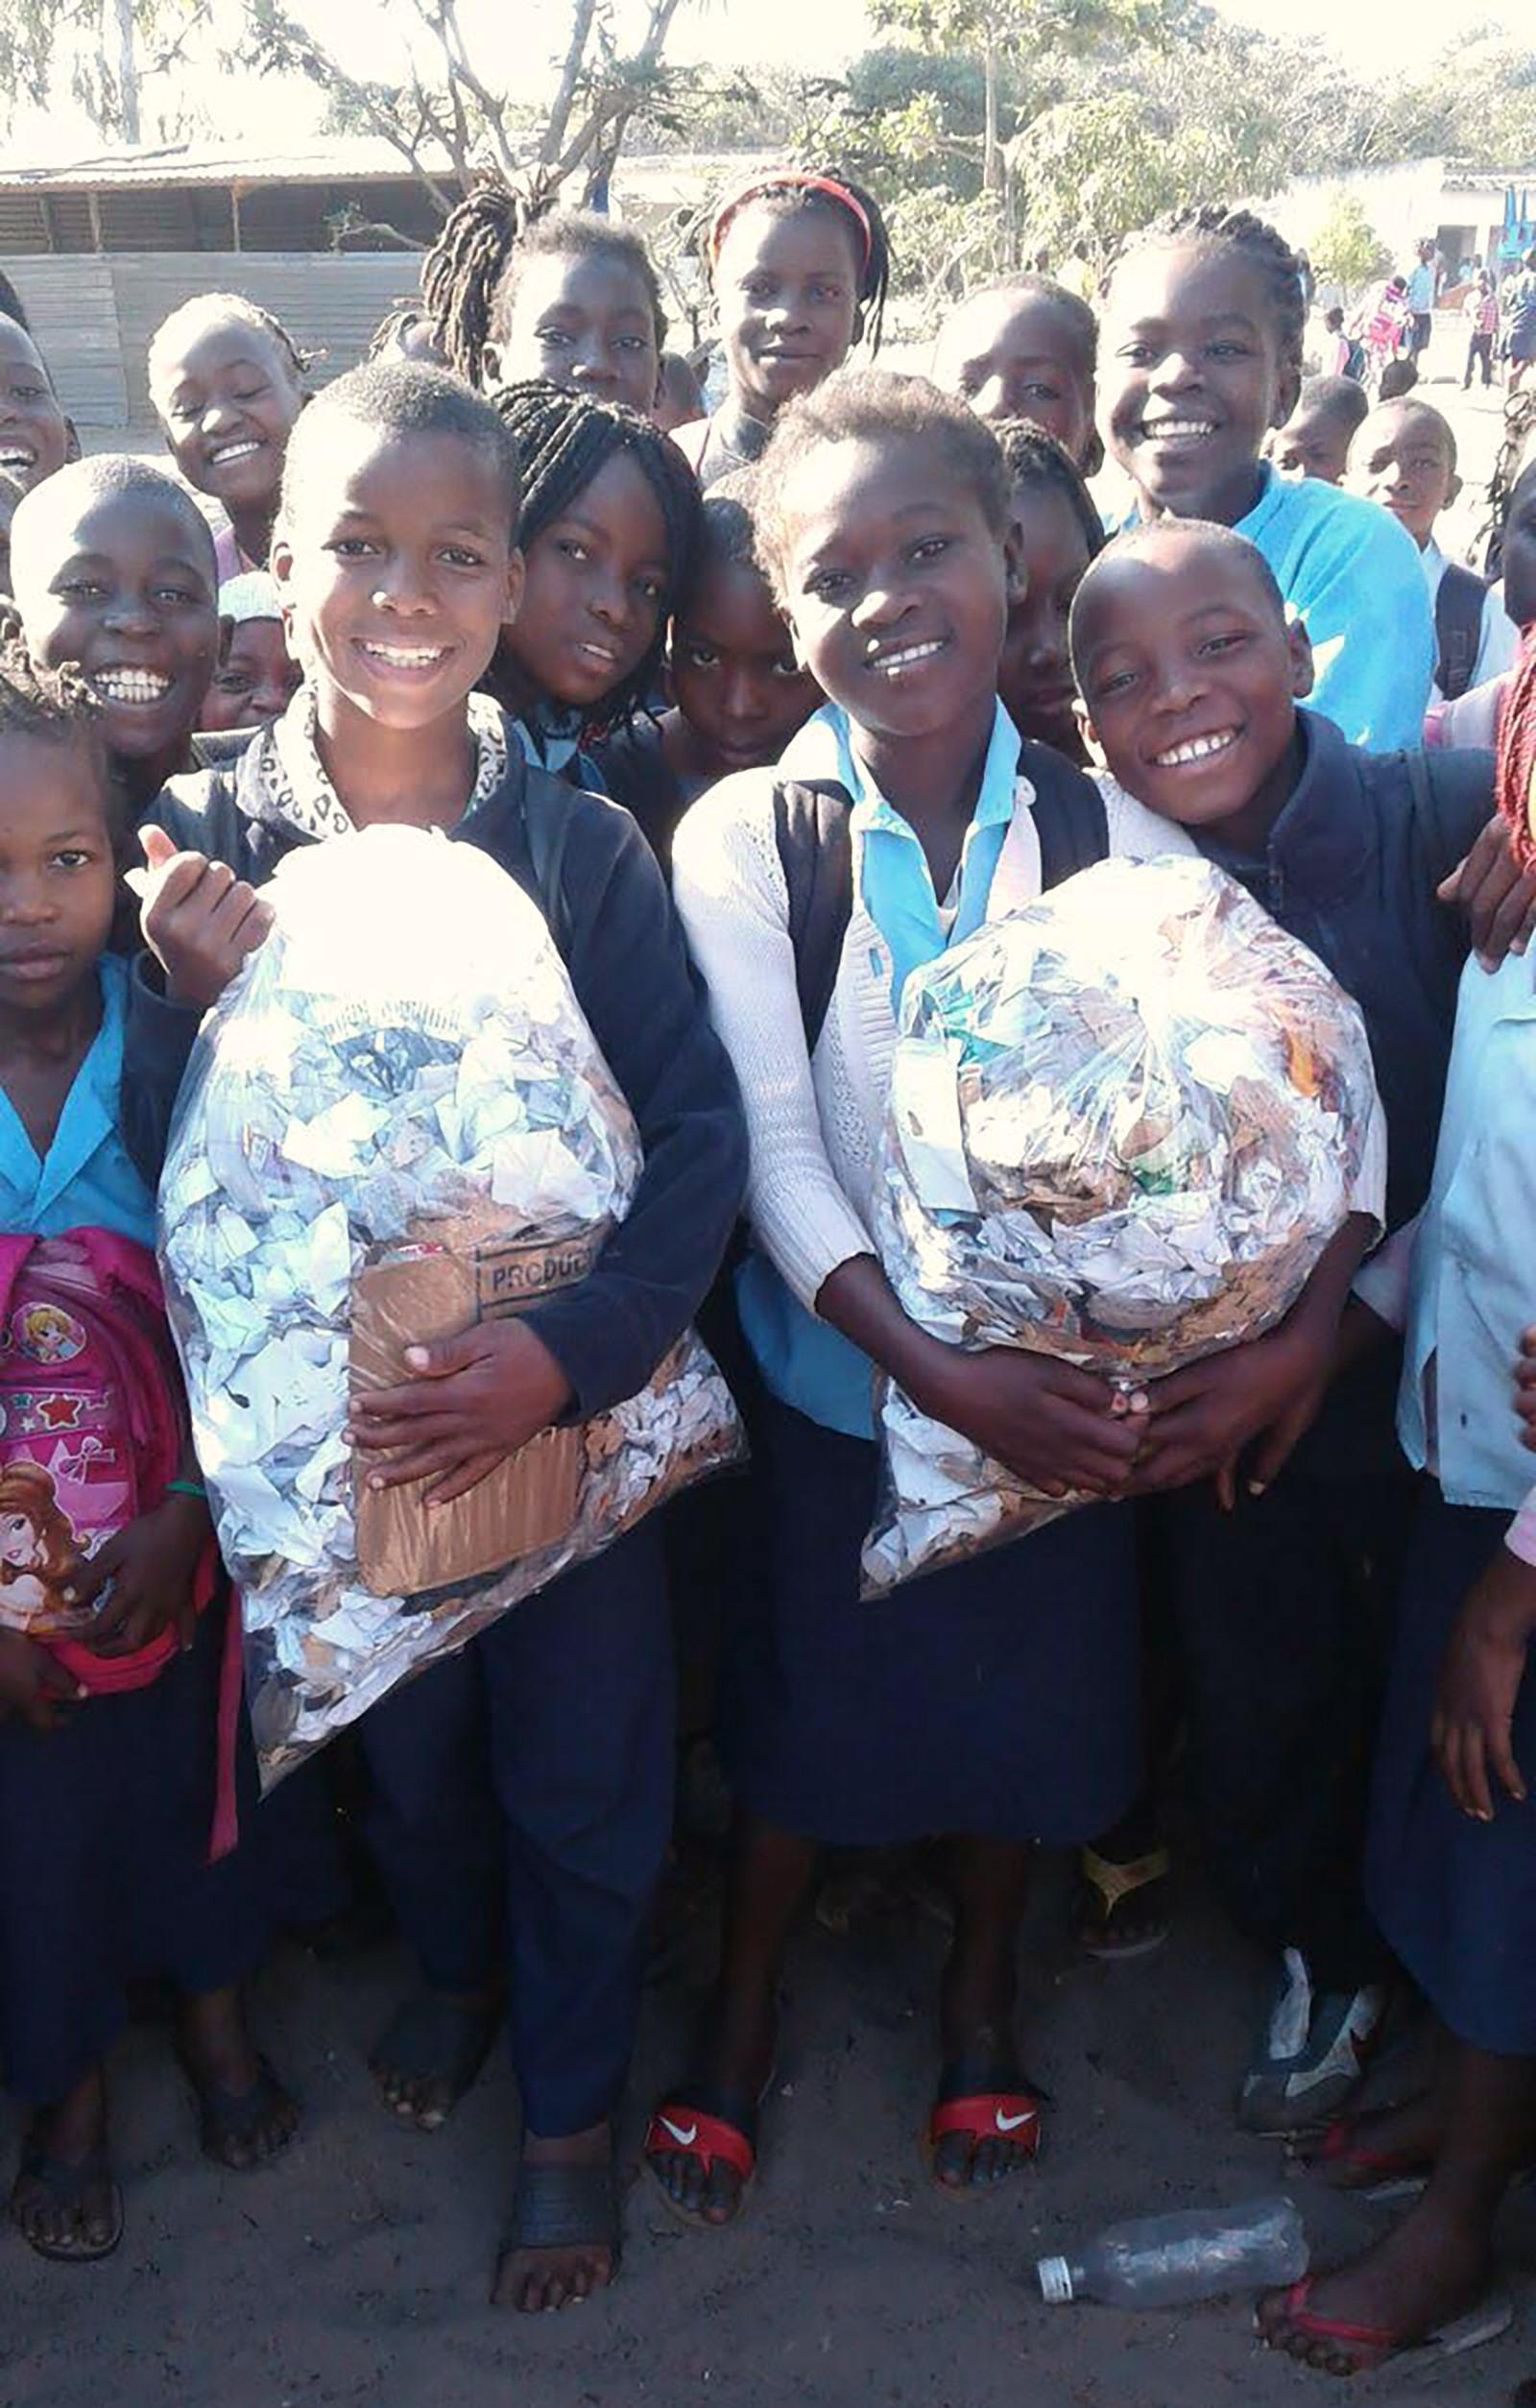 Children gathered, smiling into the camera, carrying plastic bags with litter. 